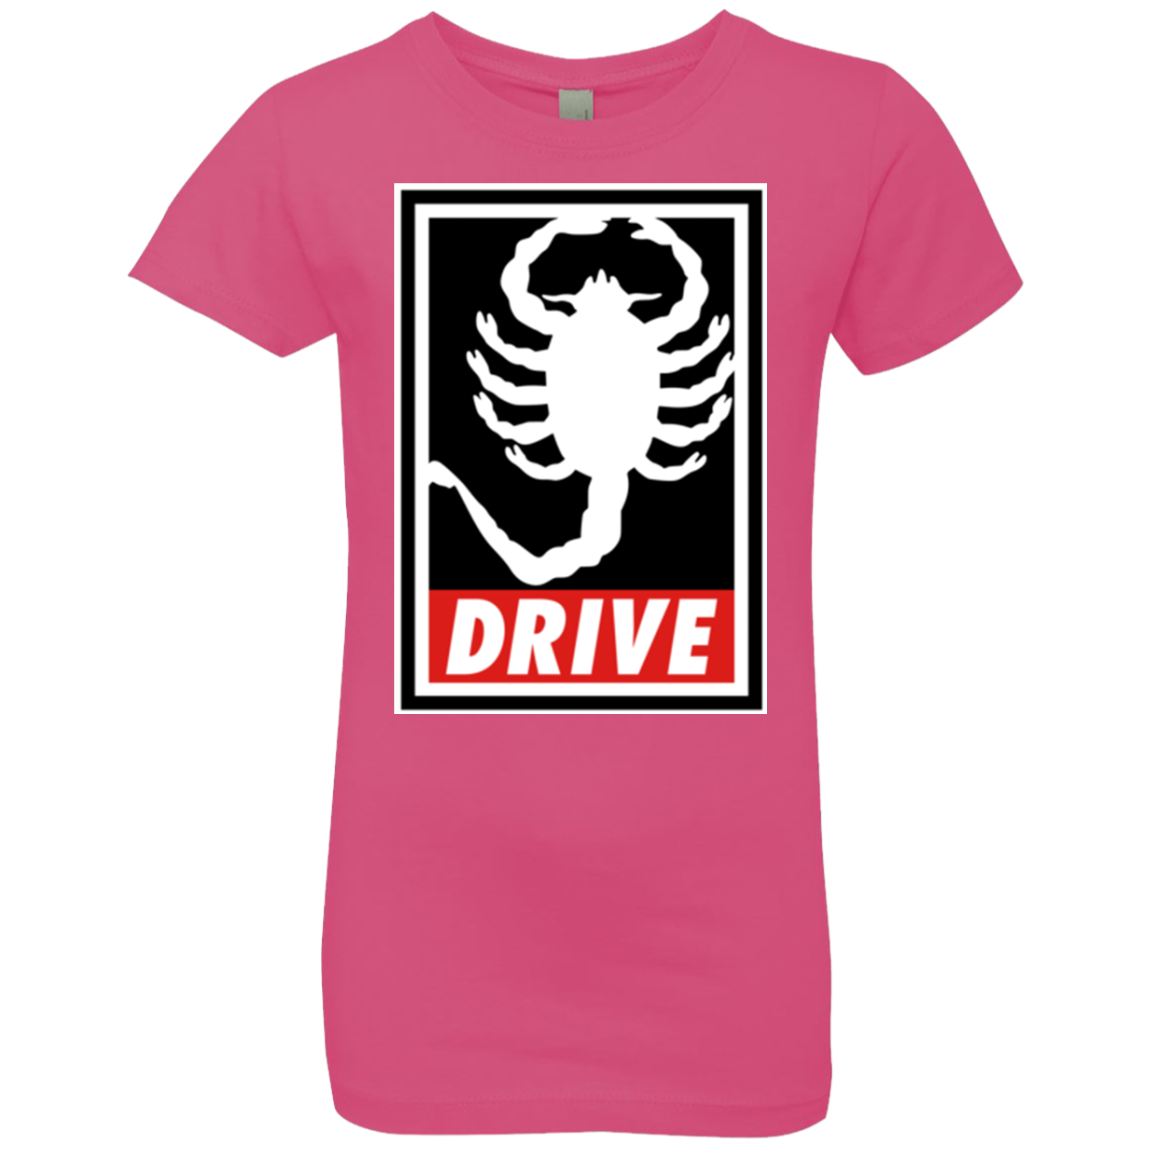 Obey and drive Girls Premium T-Shirt